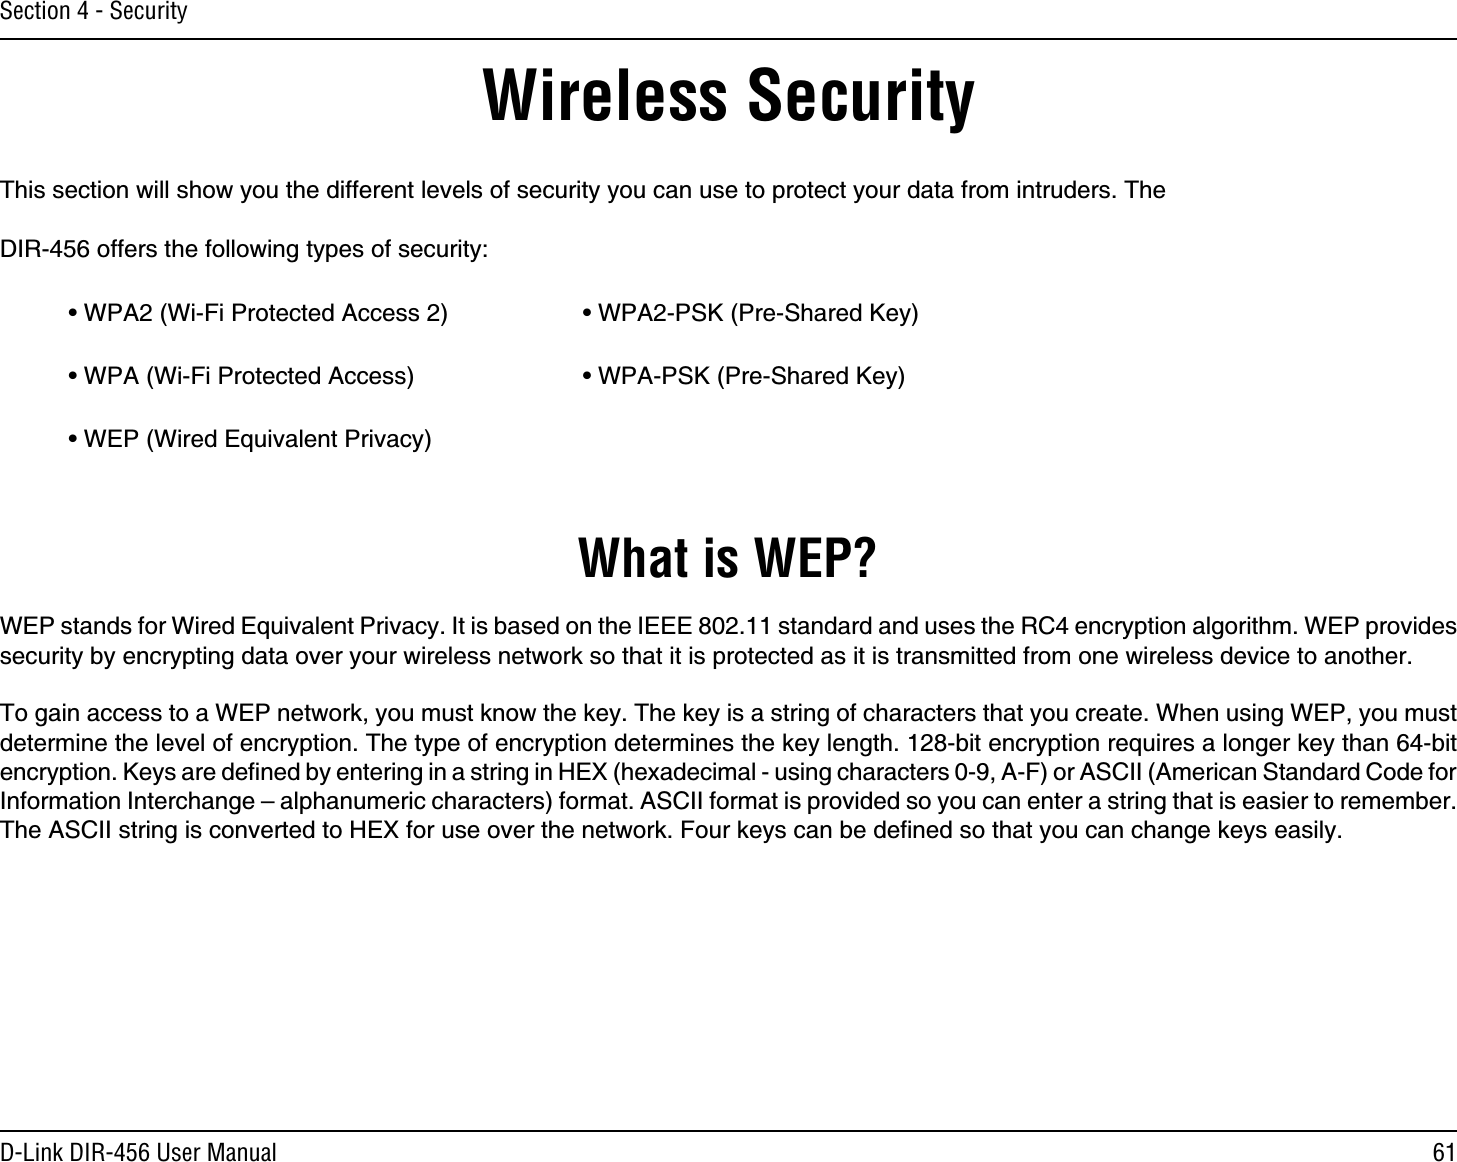 61D-Link DIR-456 User ManualSection 4 - SecurityWireless SecurityThis section will show you the different levels of security you can use to protect your data from intruders. The DIR-456 offers the following types of security:• WPA2 (Wi-Fi Protected Access 2)     • WPA2-PSK (Pre-Shared Key)• WPA (Wi-Fi Protected Access)      • WPA-PSK (Pre-Shared Key)• WEP (Wired Equivalent Privacy)What is WEP?WEP stands for Wired Equivalent Privacy. It is based on the IEEE 802.11 standard and uses the RC4 encryption algorithm. WEP provides security by encrypting data over your wireless network so that it is protected as it is transmitted from one wireless device to another.To gain access to a WEP network, you must know the key. The key is a string of characters that you create. When using WEP, you must determine the level of encryption. The type of encryption determines the key length. 128-bit encryption requires a longer key than 64-bit encryption. Keys are deﬁned by entering in a string in HEX (hexadecimal - using characters 0-9, A-F) or ASCII (American Standard Code for Information Interchange – alphanumeric characters) format. ASCII format is provided so you can enter a string that is easier to remember. The ASCII string is converted to HEX for use over the network. Four keys can be deﬁned so that you can change keys easily.